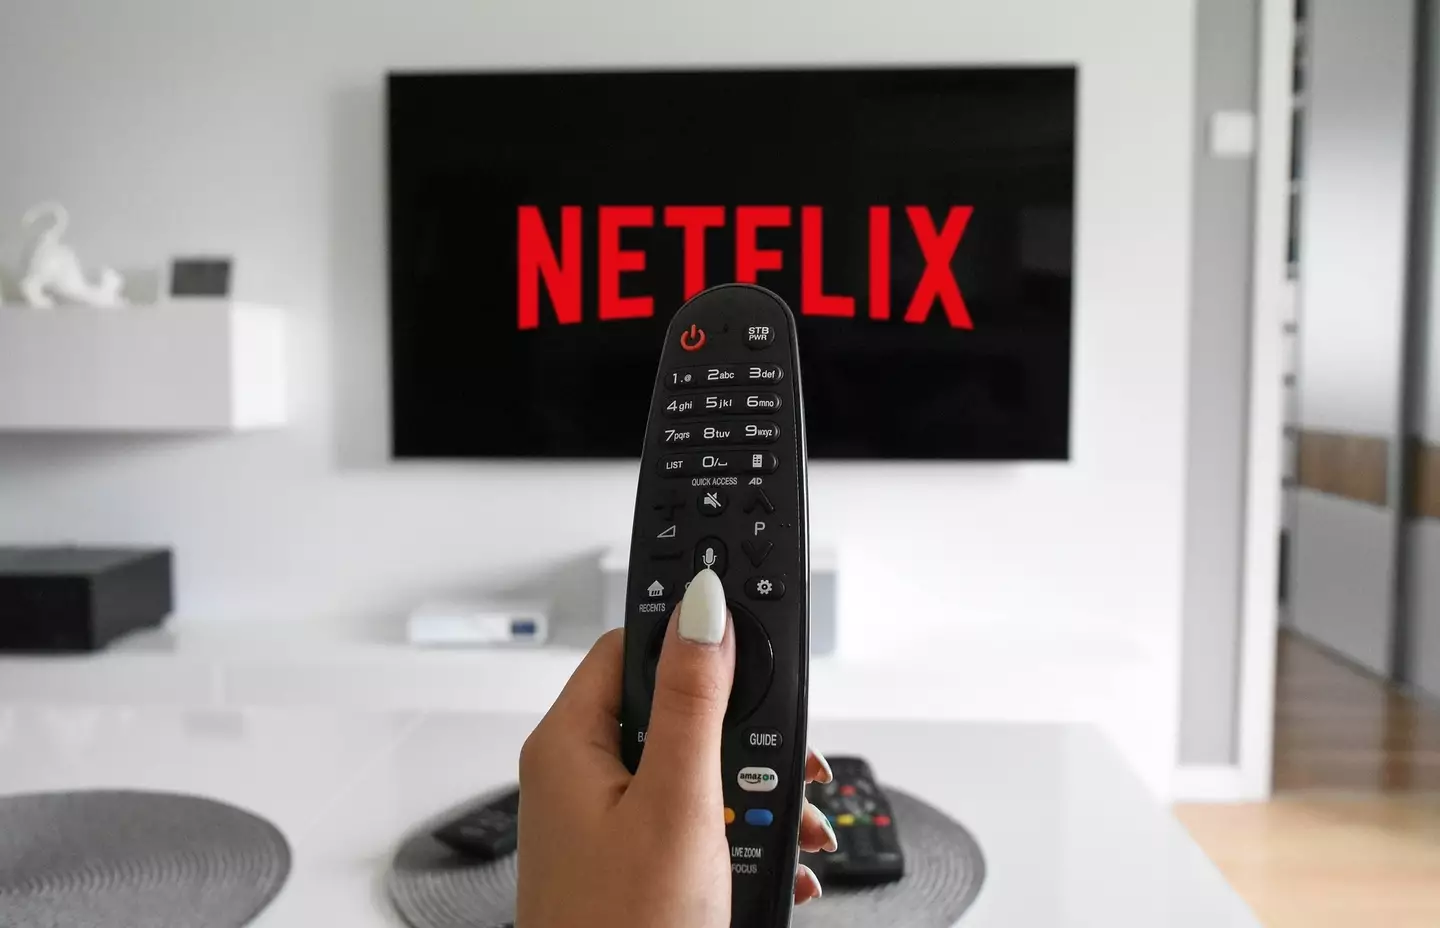 Netflix has introduced new rules for its users.